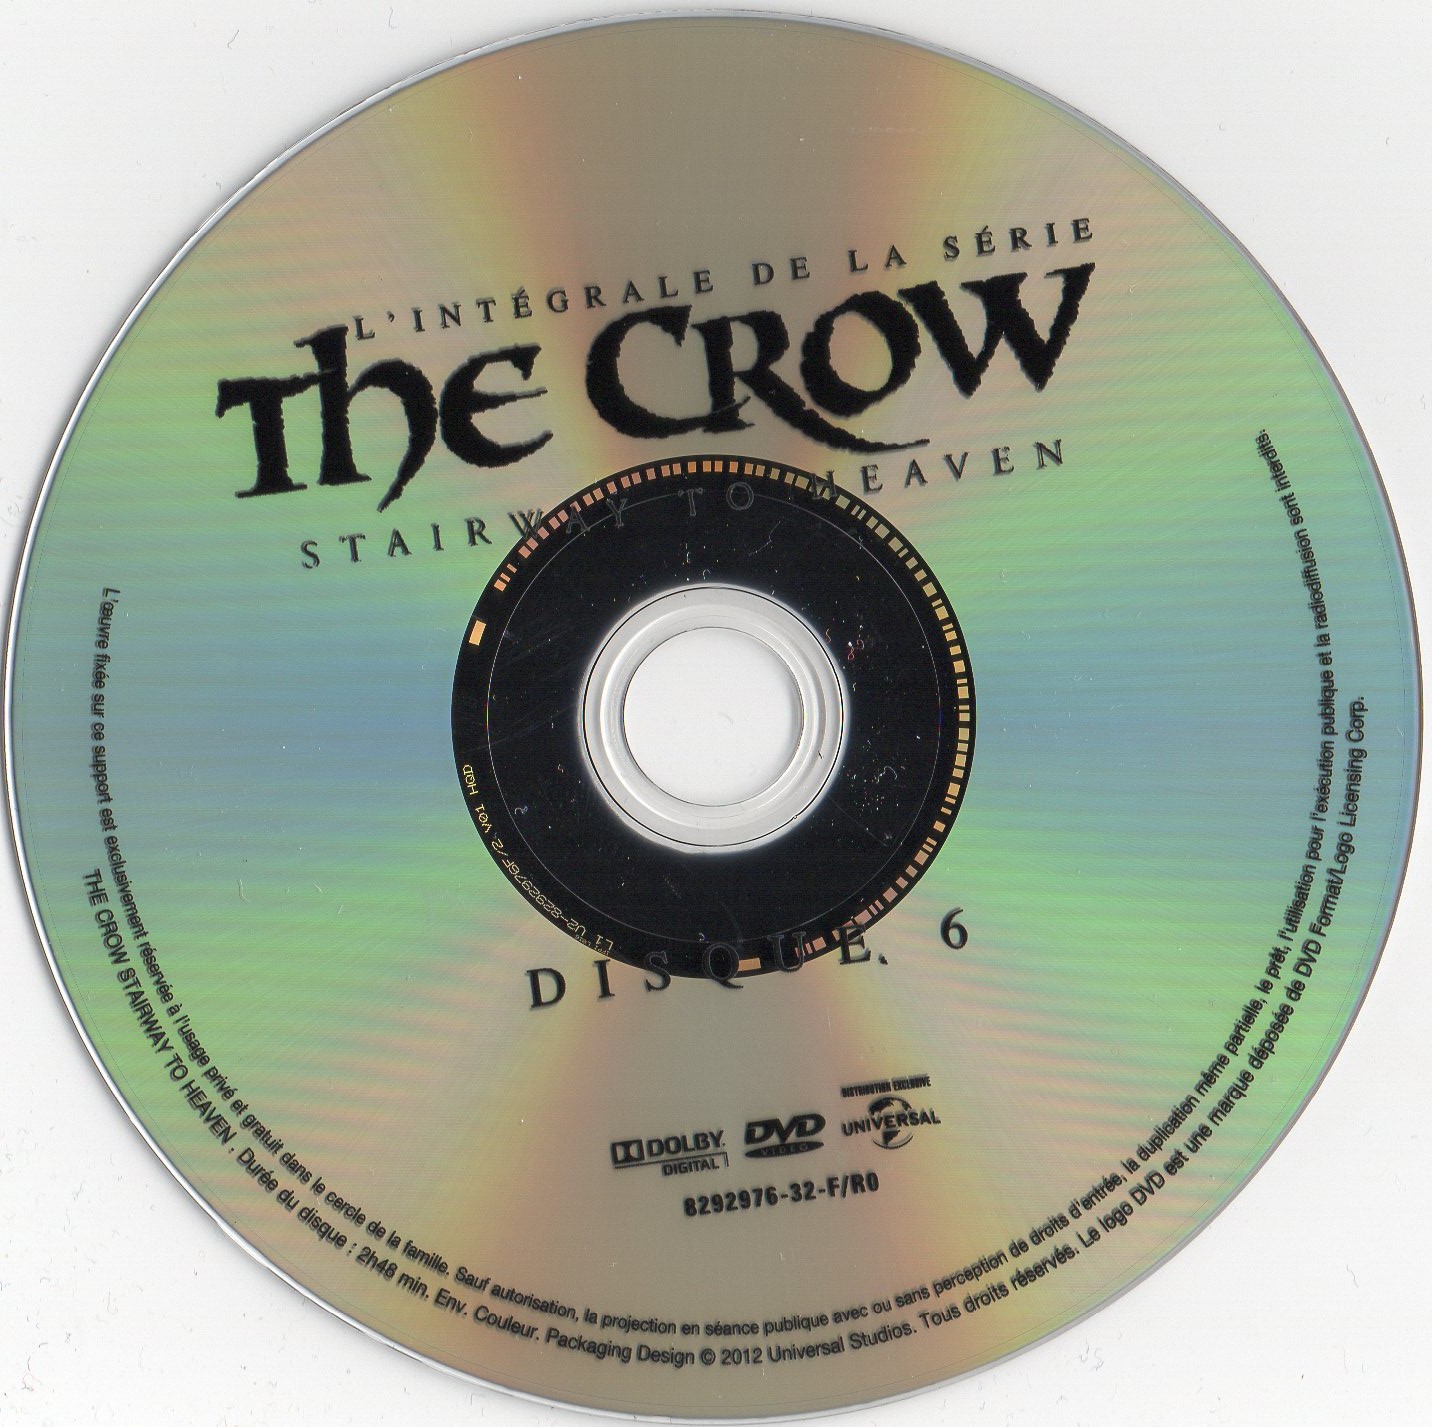 The crow stairway to heaven DISC 6